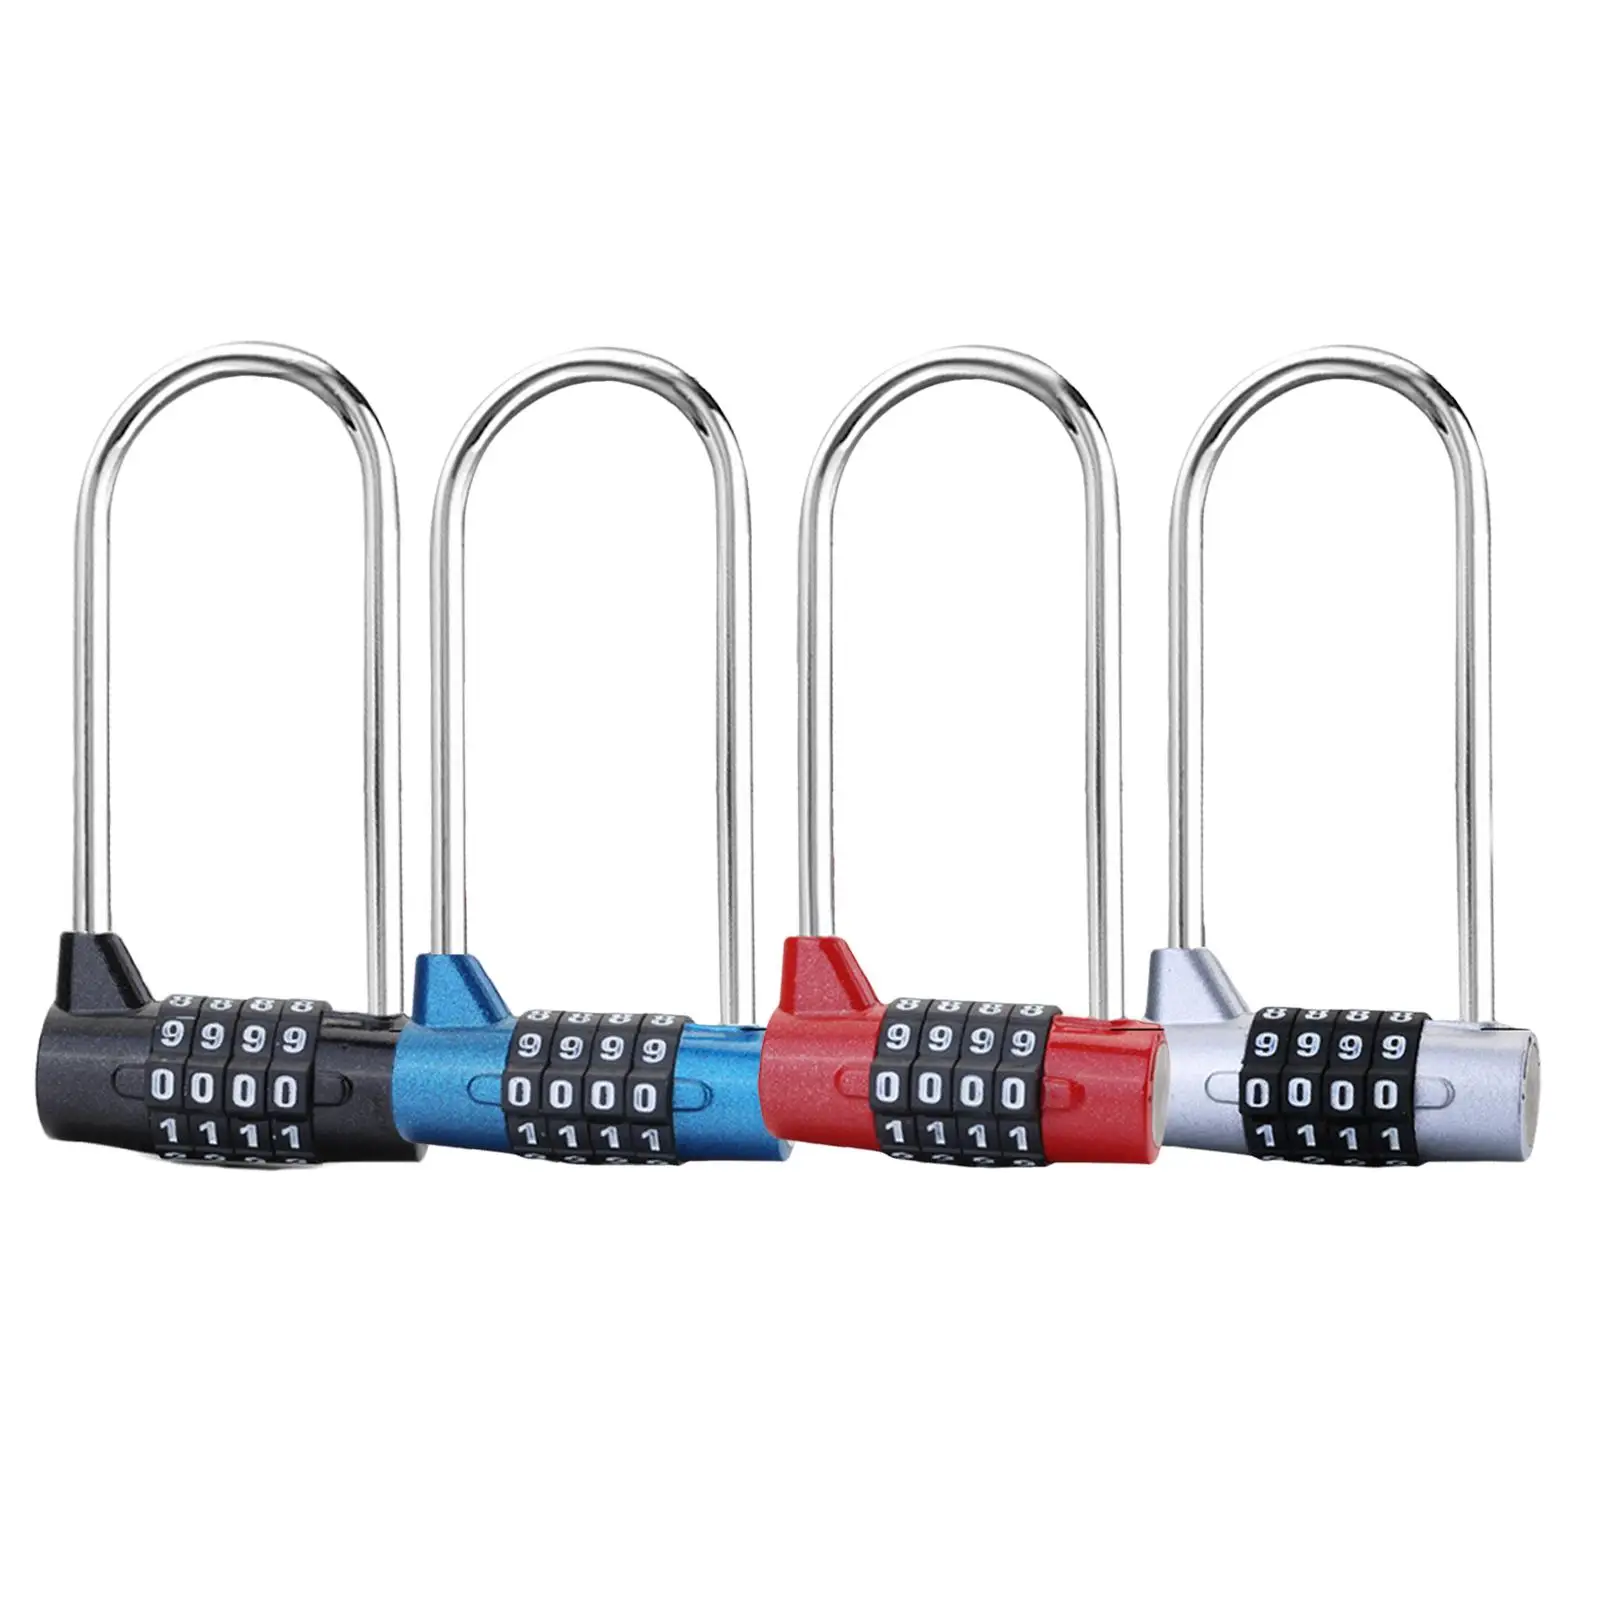 4 Digit Combination Lock Outdoor Safety Lock Lengthened Shackle Lock Resettable Code Pad Lock for Bicycle Hasp Cabinet Fence